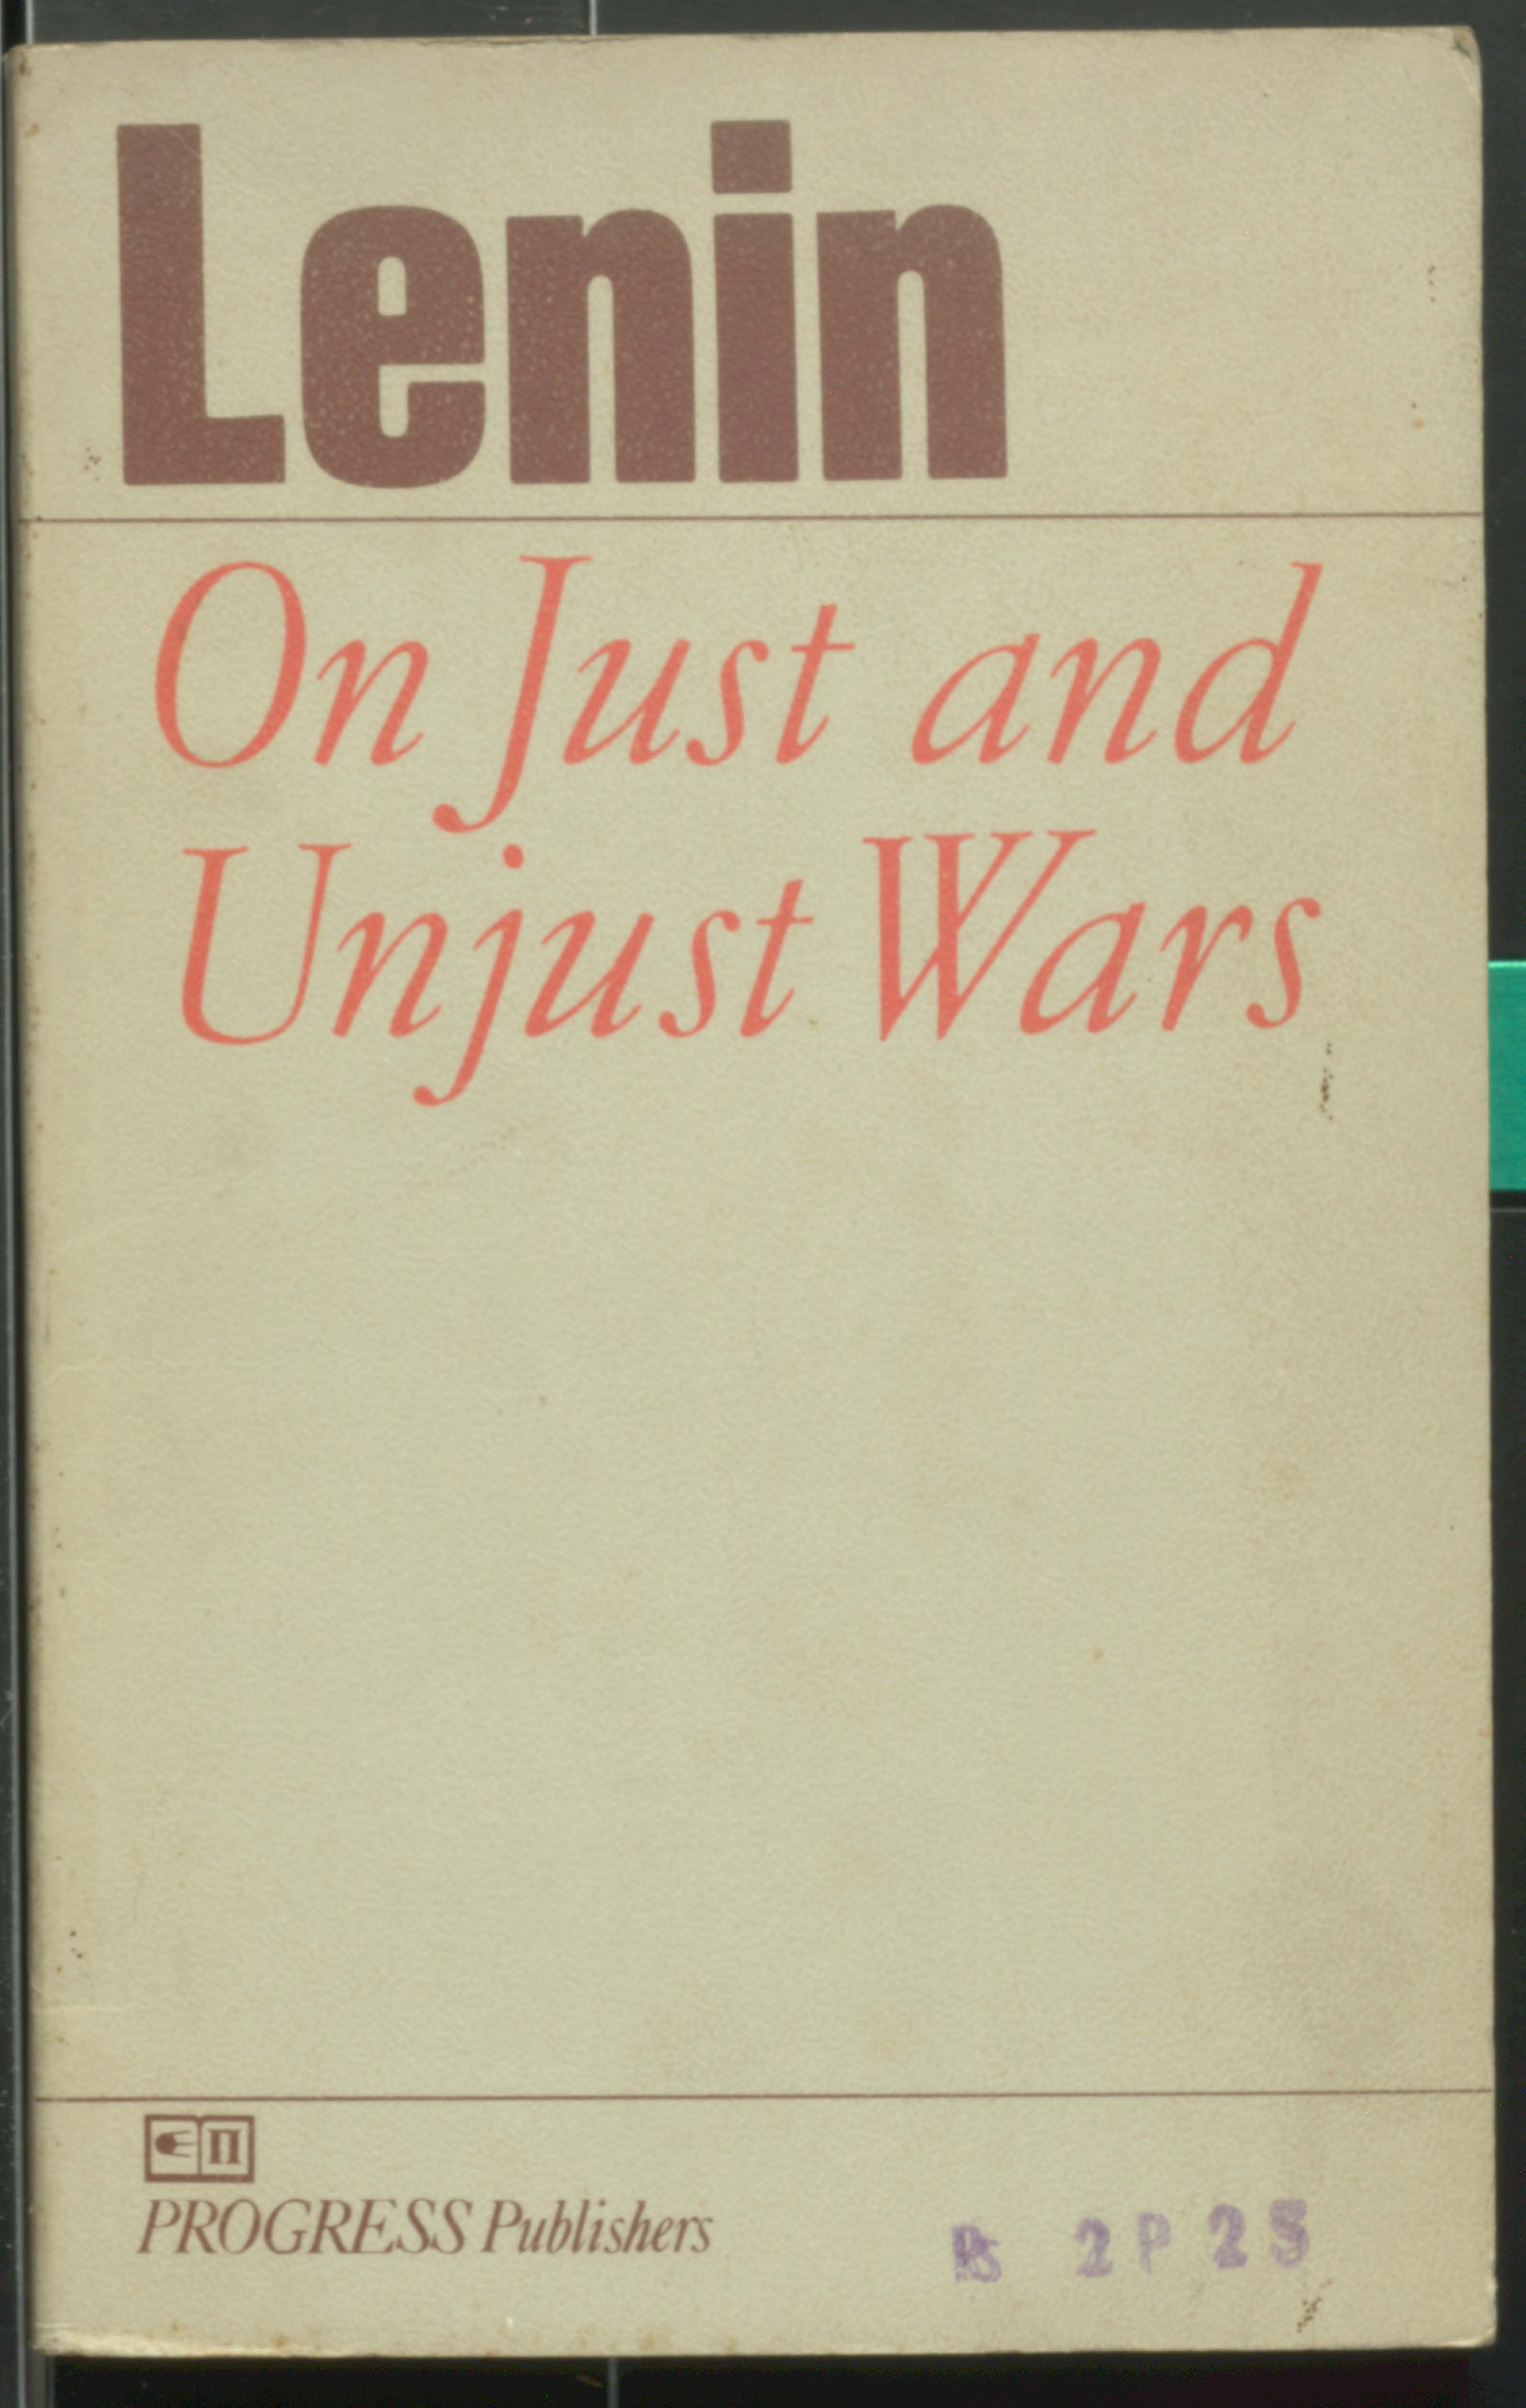 Lenin on just and Unjust Wars